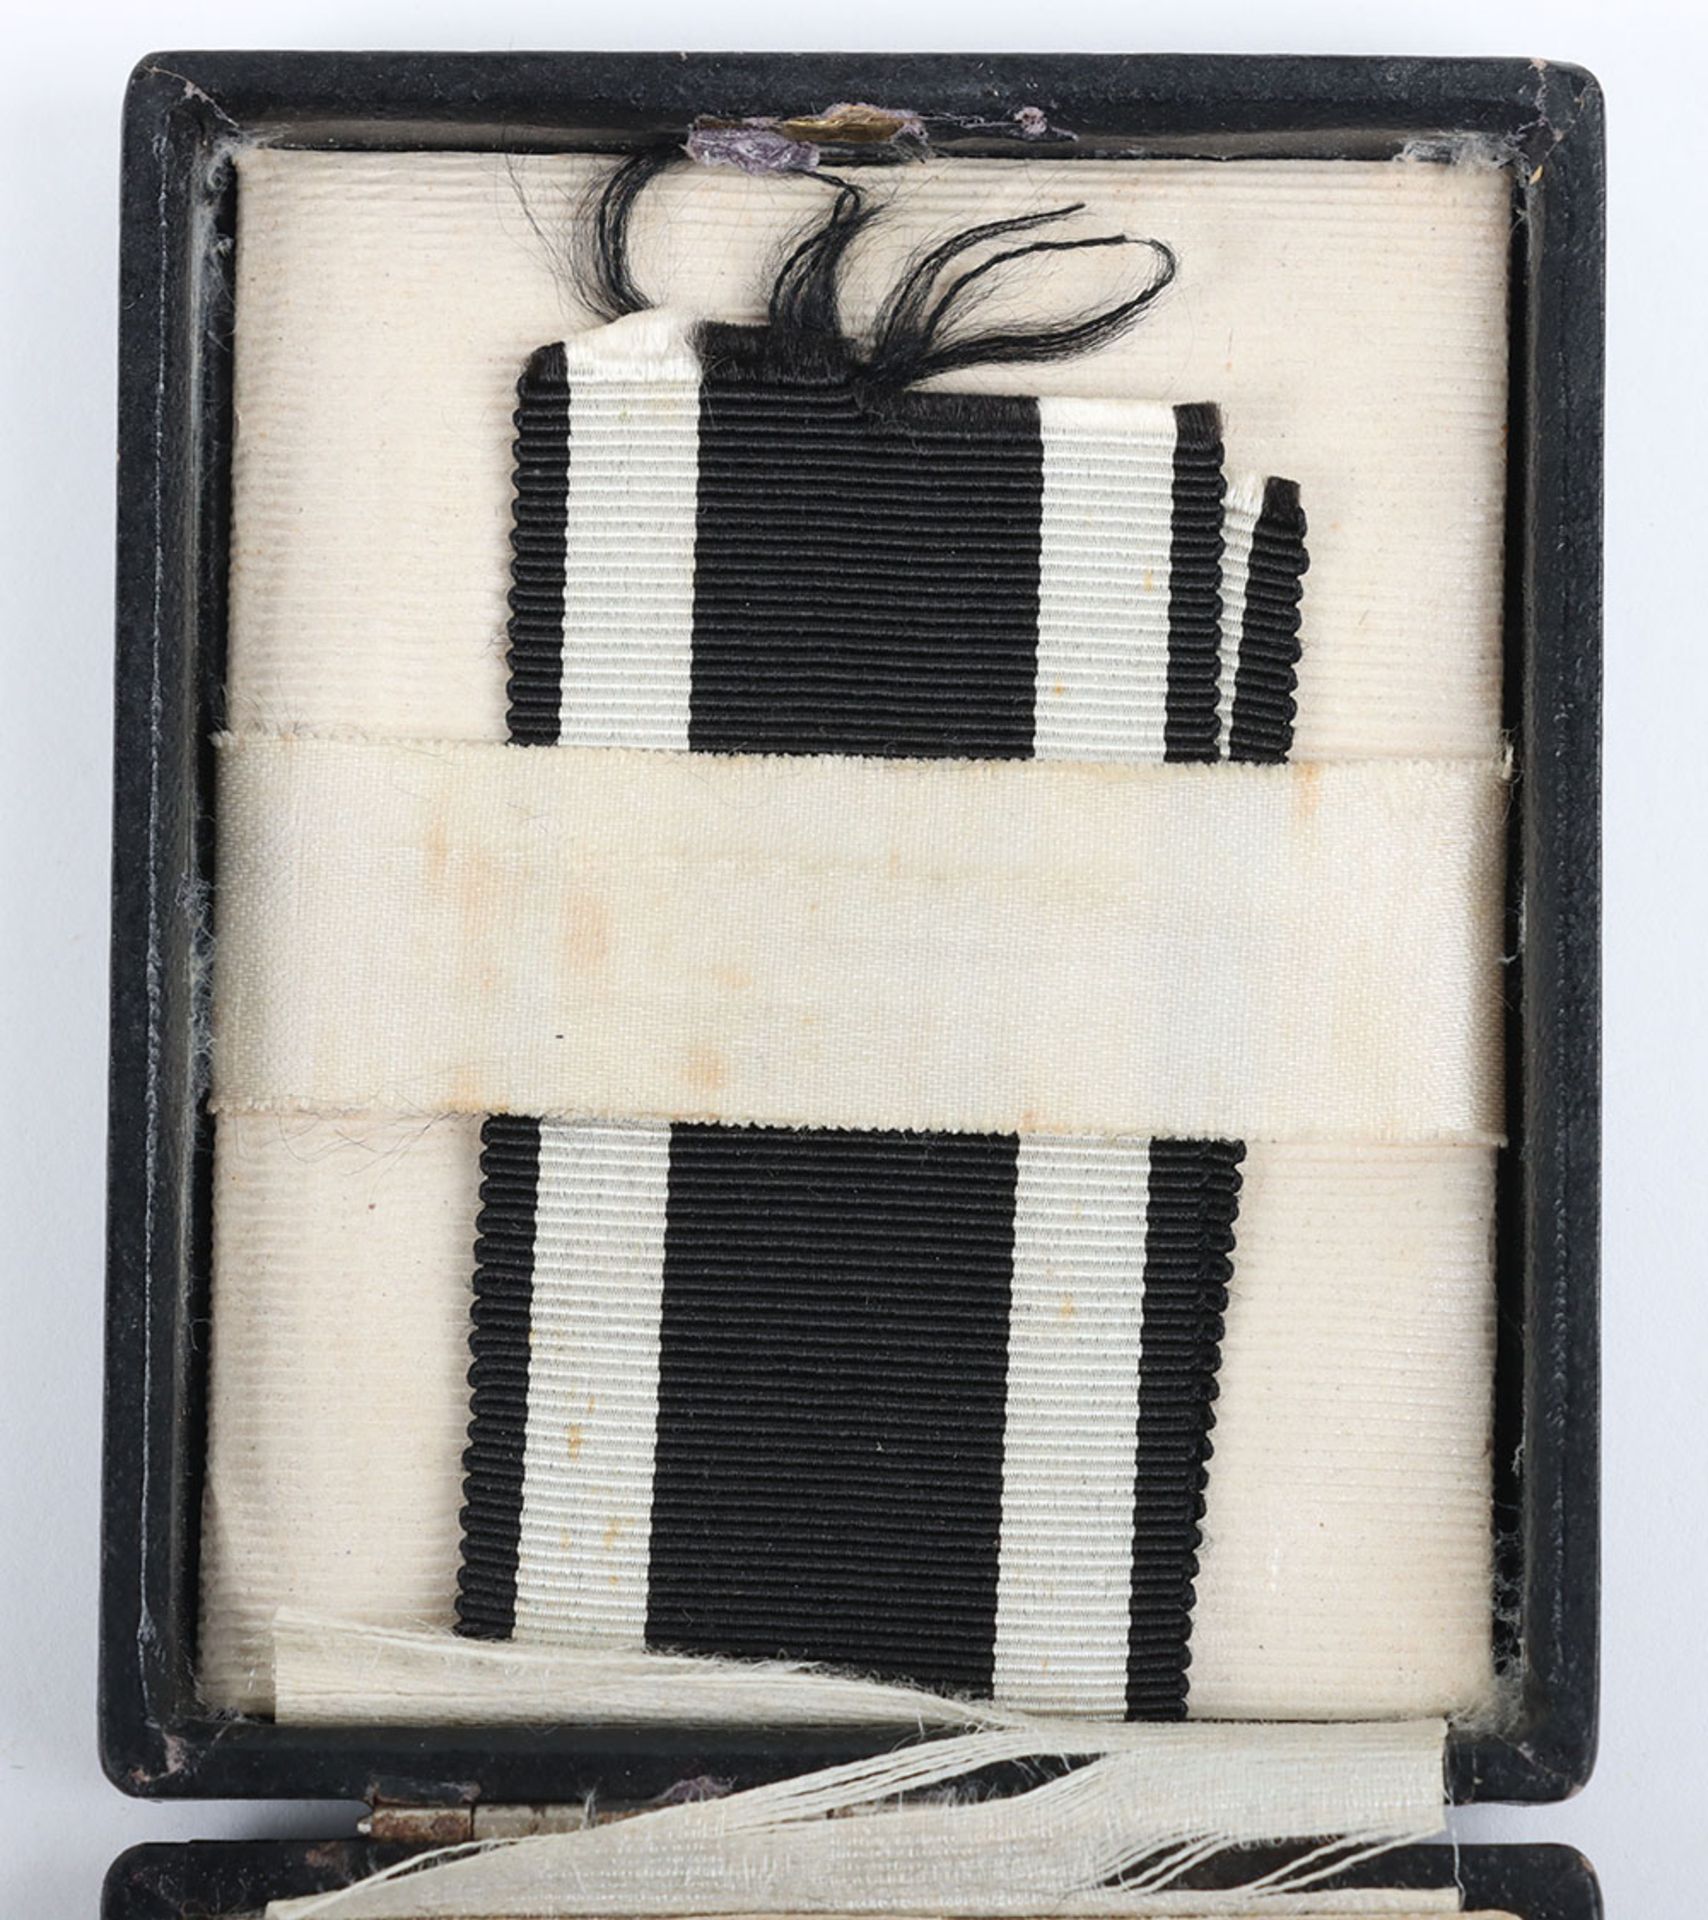 1914 Iron Cross 2nd Class with Presentation Case - Image 6 of 15